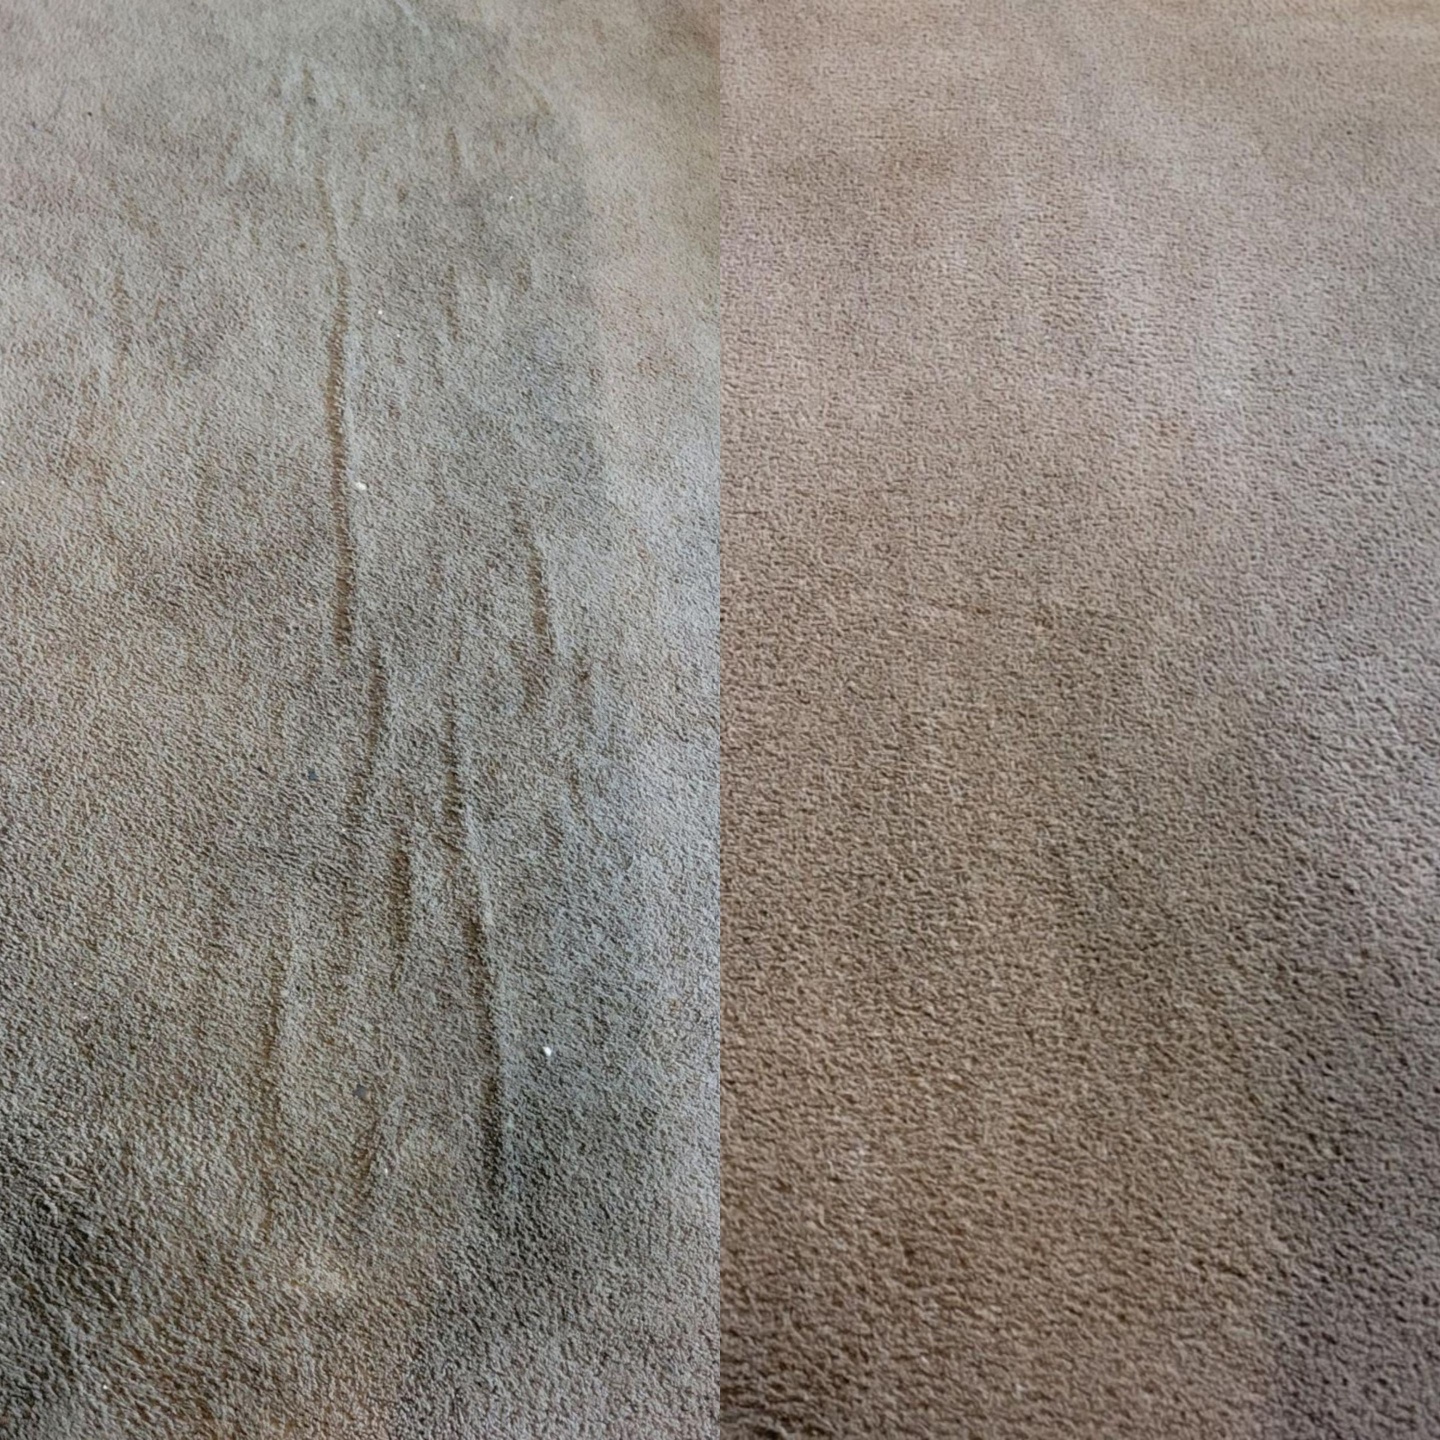 M.R.S. Carpet Cleaning